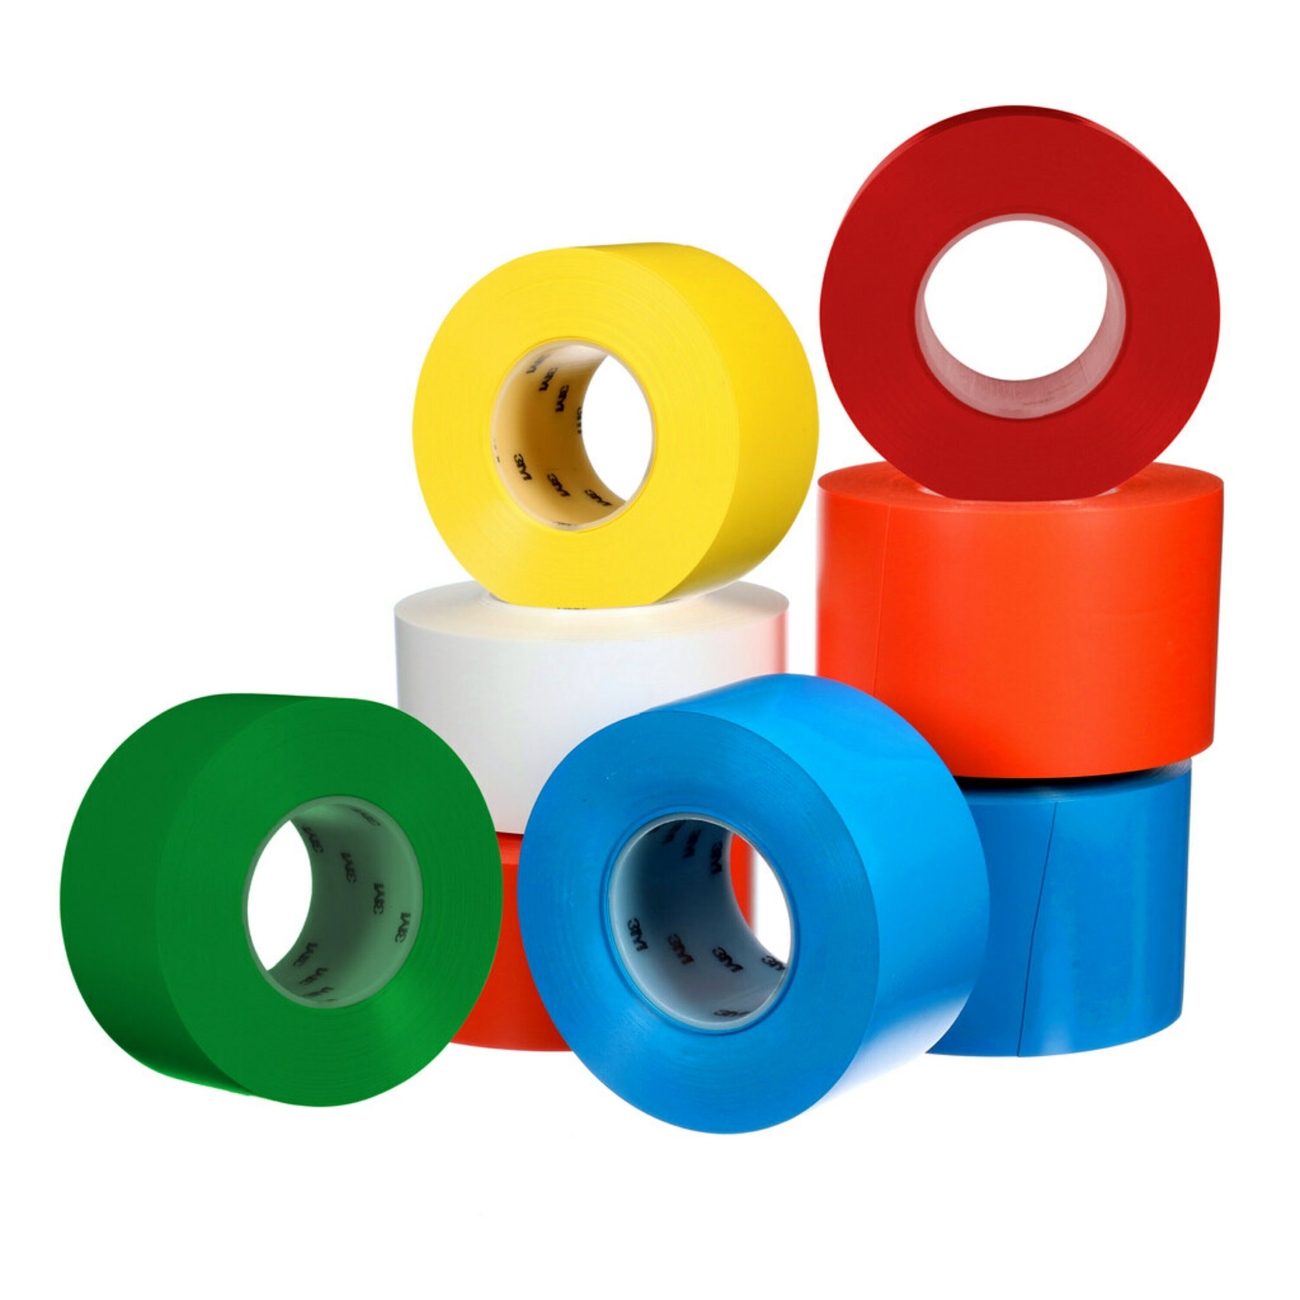 3M extra strong floor marking tape 971, blue, 50.8mm x 32.9m, 0.43mm